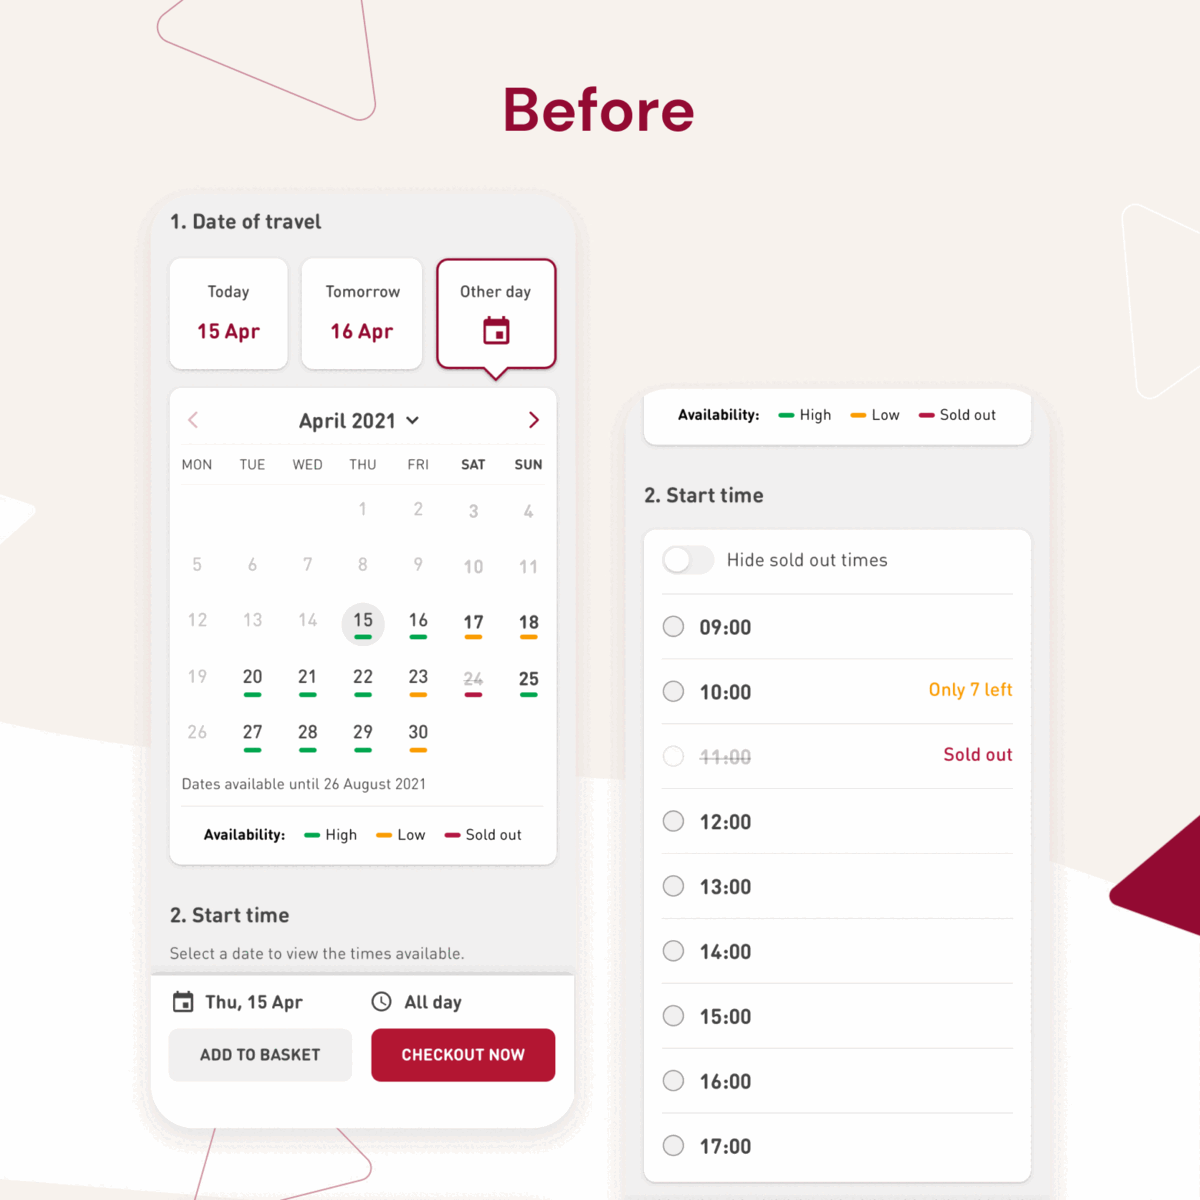 Big Bus Tours' calendar picker, shown within their ticket purchasing journey, before and after the digital transformation project